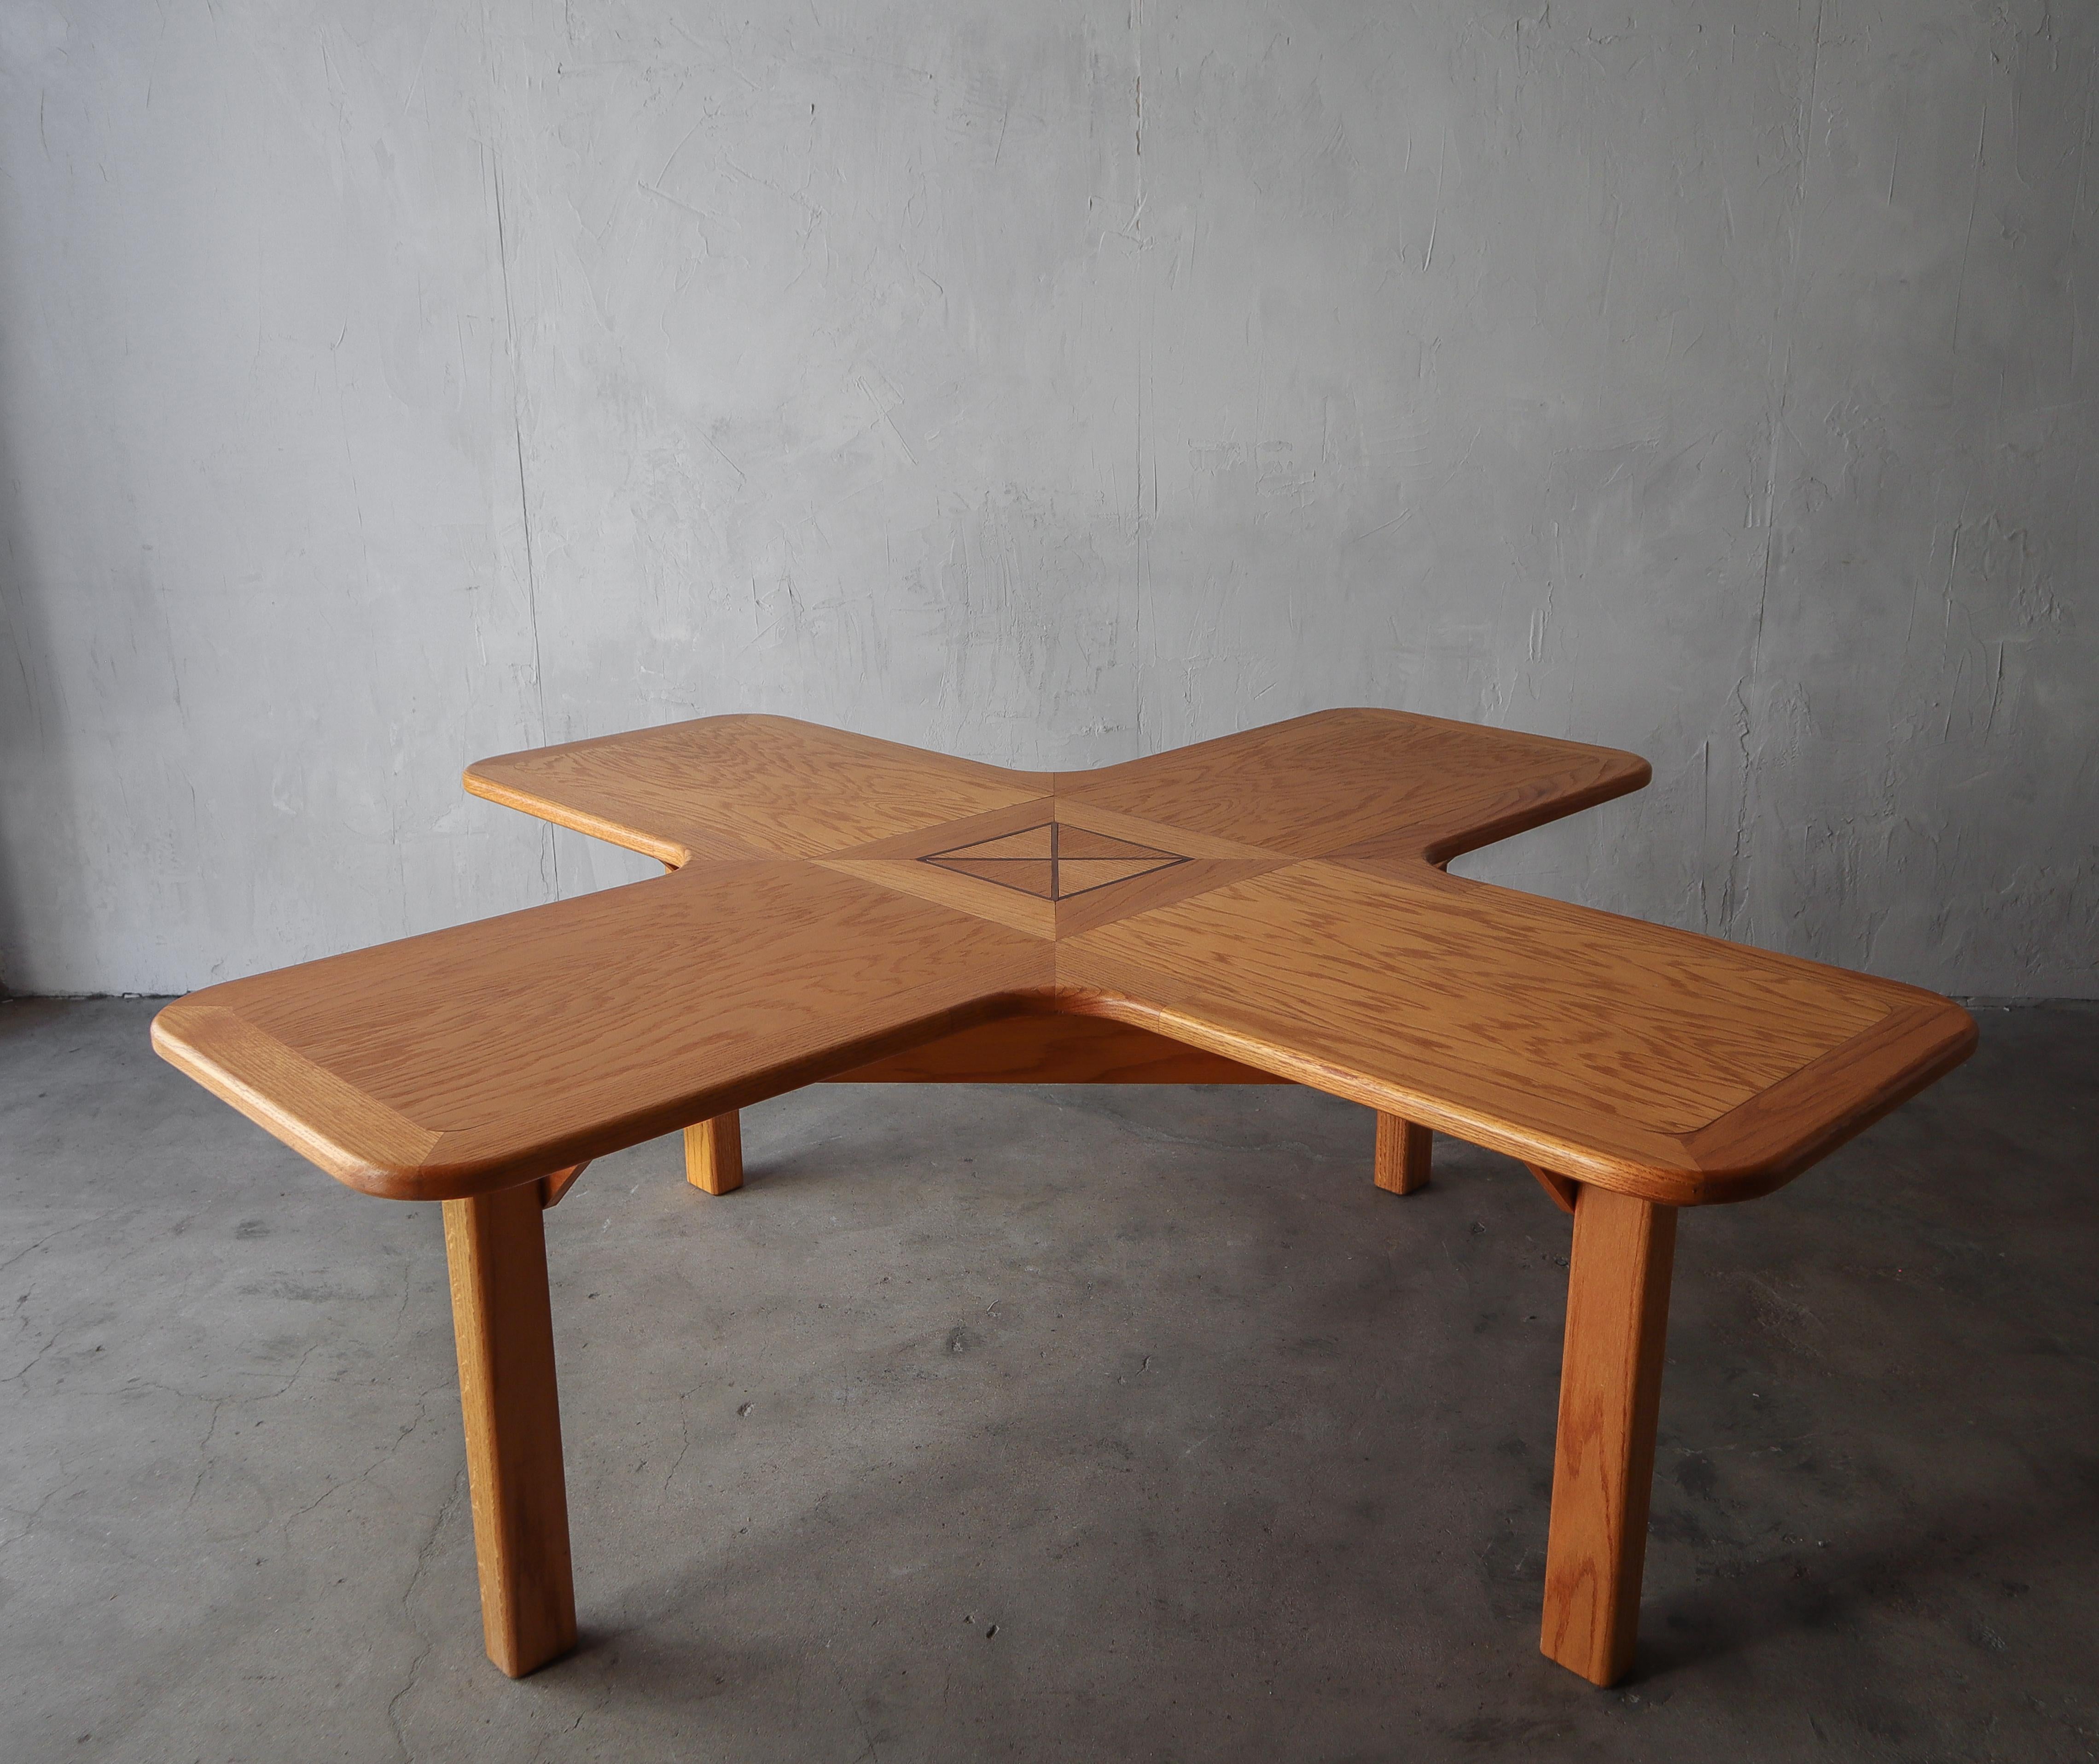 A unique table that can be used numerous ways. Constructed of solid oak in the shape of an X or a Plus sign depending on how you view it, with a unique inlaid design in the center. This table would make an amazing center table but could also be used